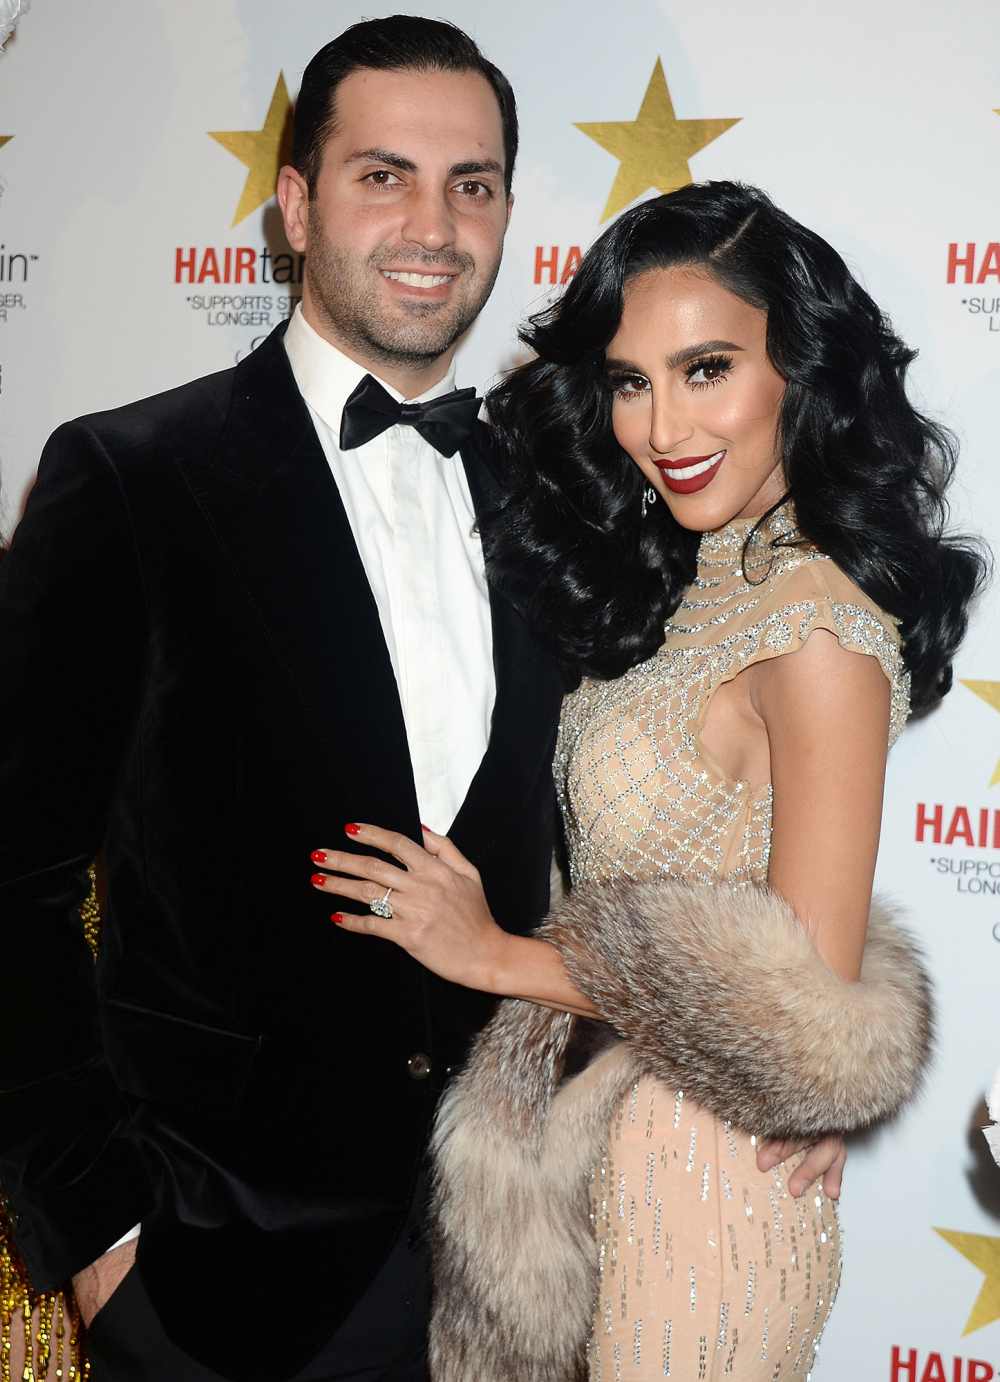 Shahs of Sunset Lilly Ghalichi Files for Divorce From Dara Mir Again